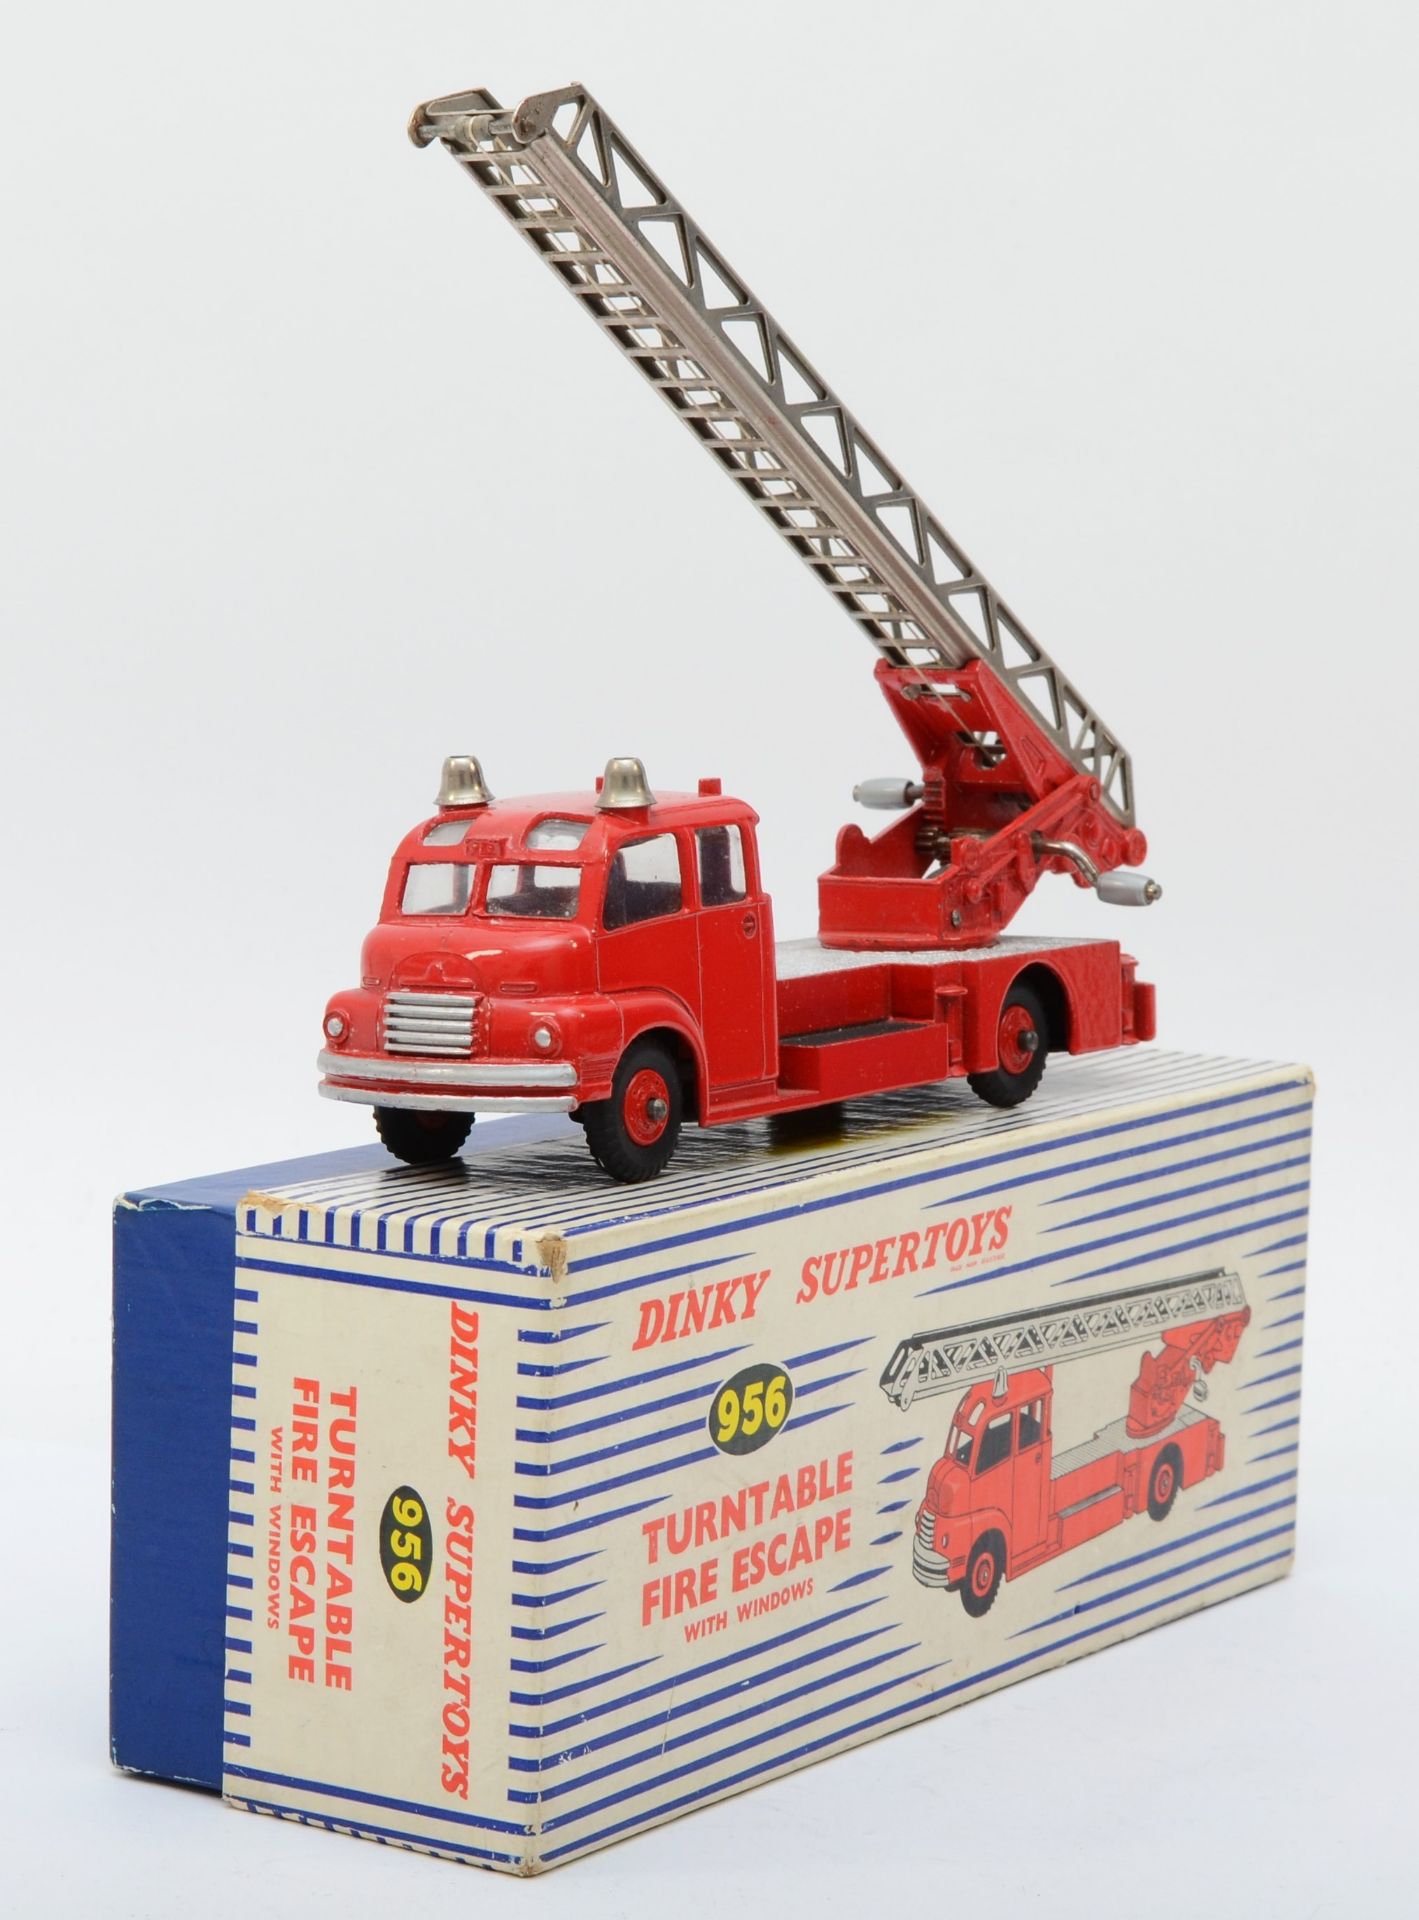 Dinky Toys - A 956 Dinky 'Supertoy' Turntable Fire Escape, boxed with instruction leaflet.